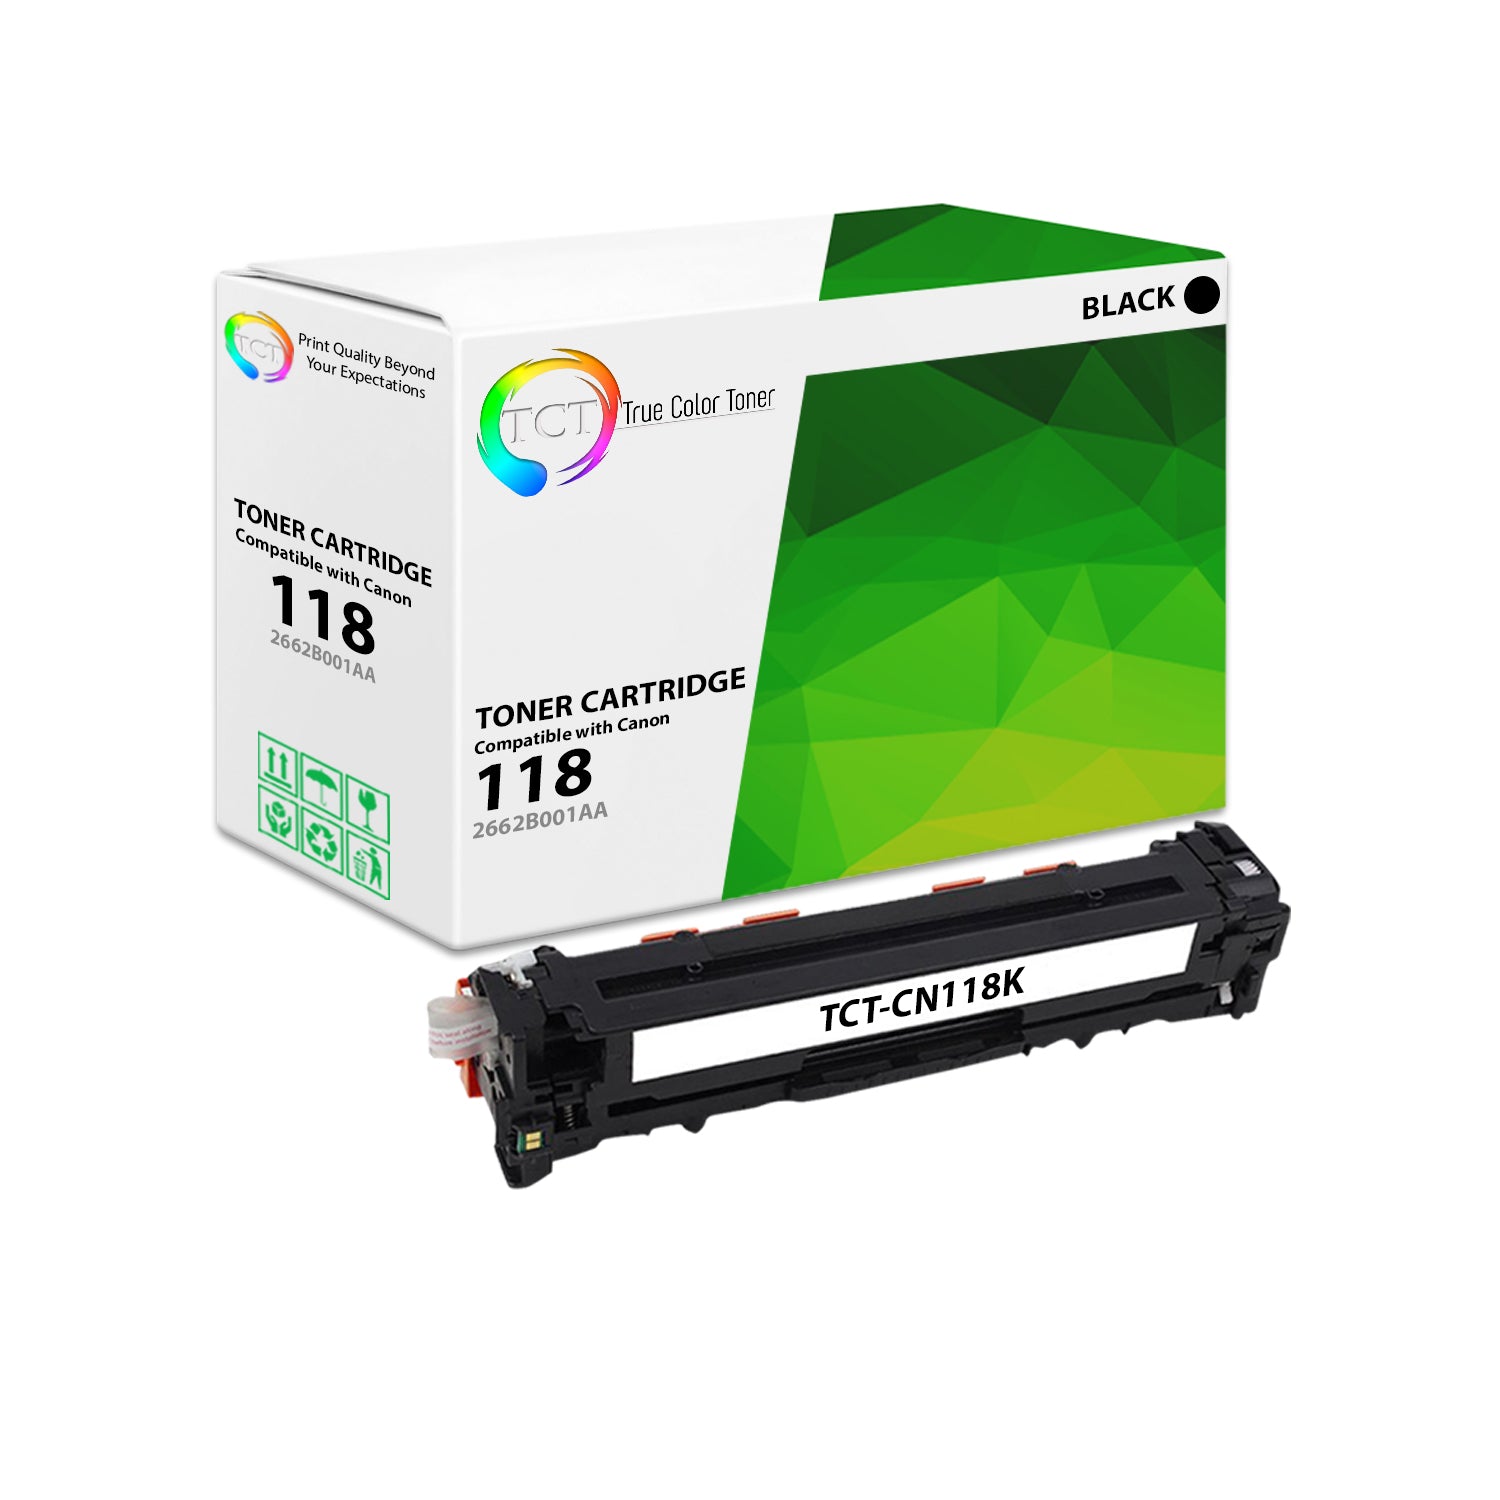 TCT Compatible Toner Cartridge Replacement for the Canon 118 Series - 1 Pack Black